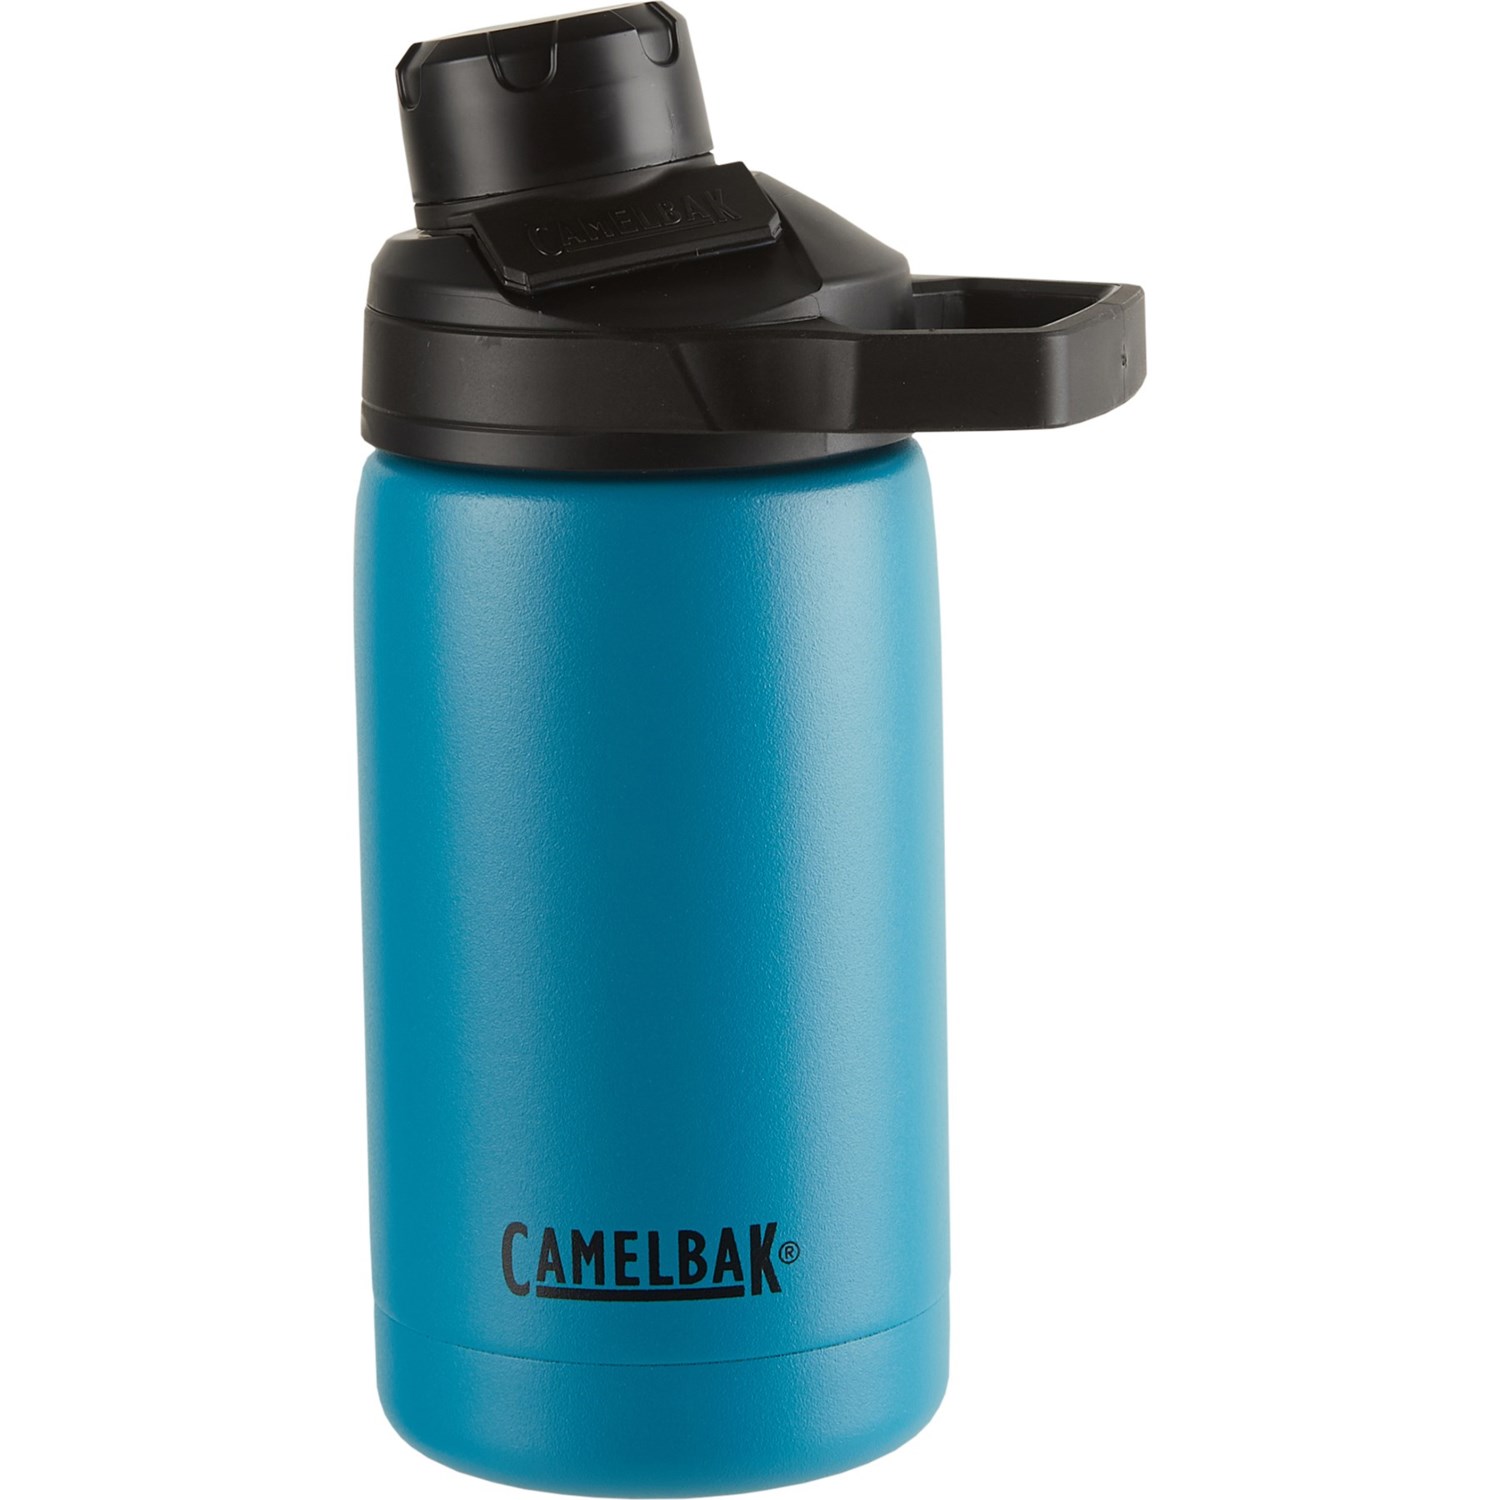 CamelBak Chute Mag Vacuum-Insulated Water Bottle - 12 oz., Stainless Camelbak Chute Mag Water Bottle Insulated Stainless Steel